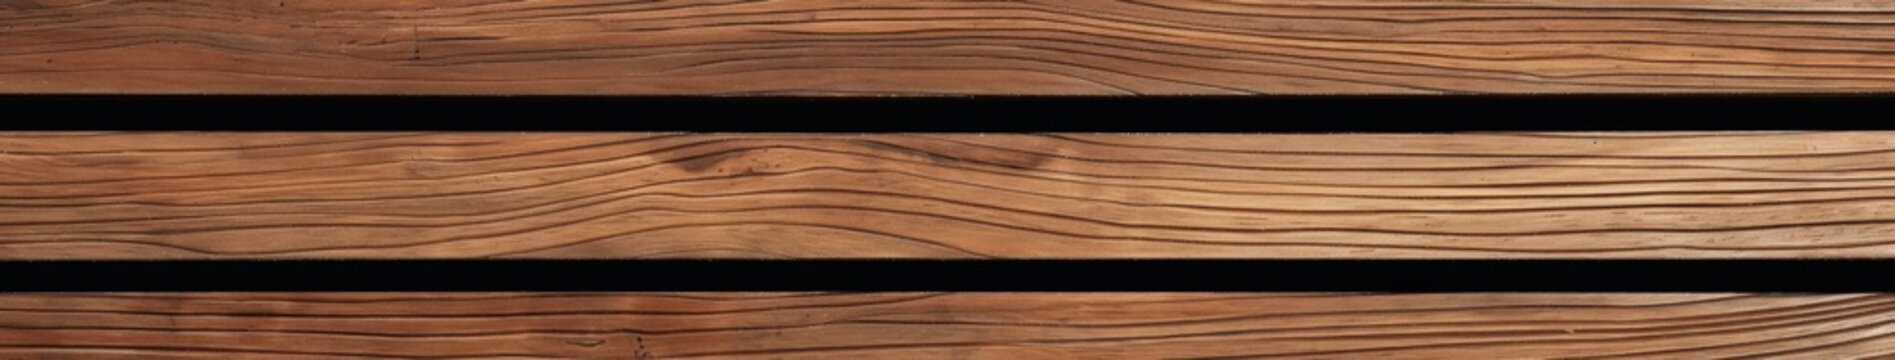 Close Up of Detail in Wood Grain